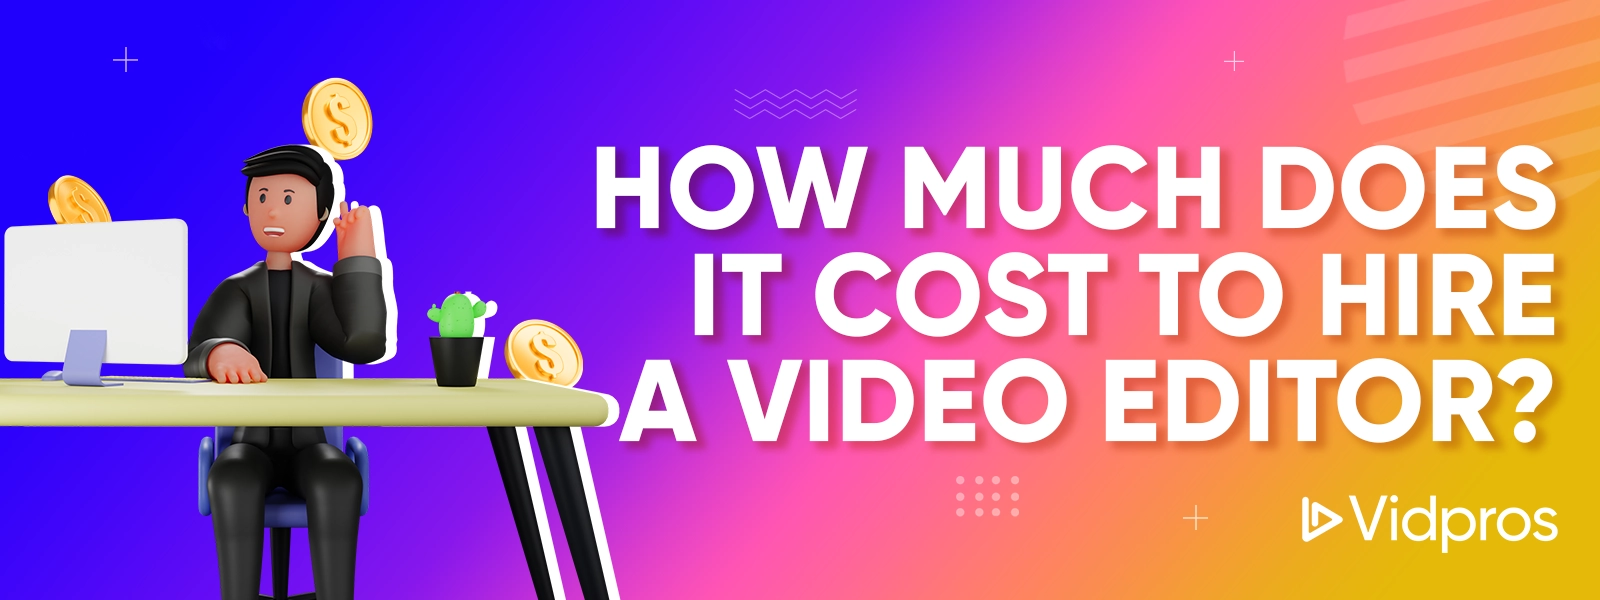 cost of video editor